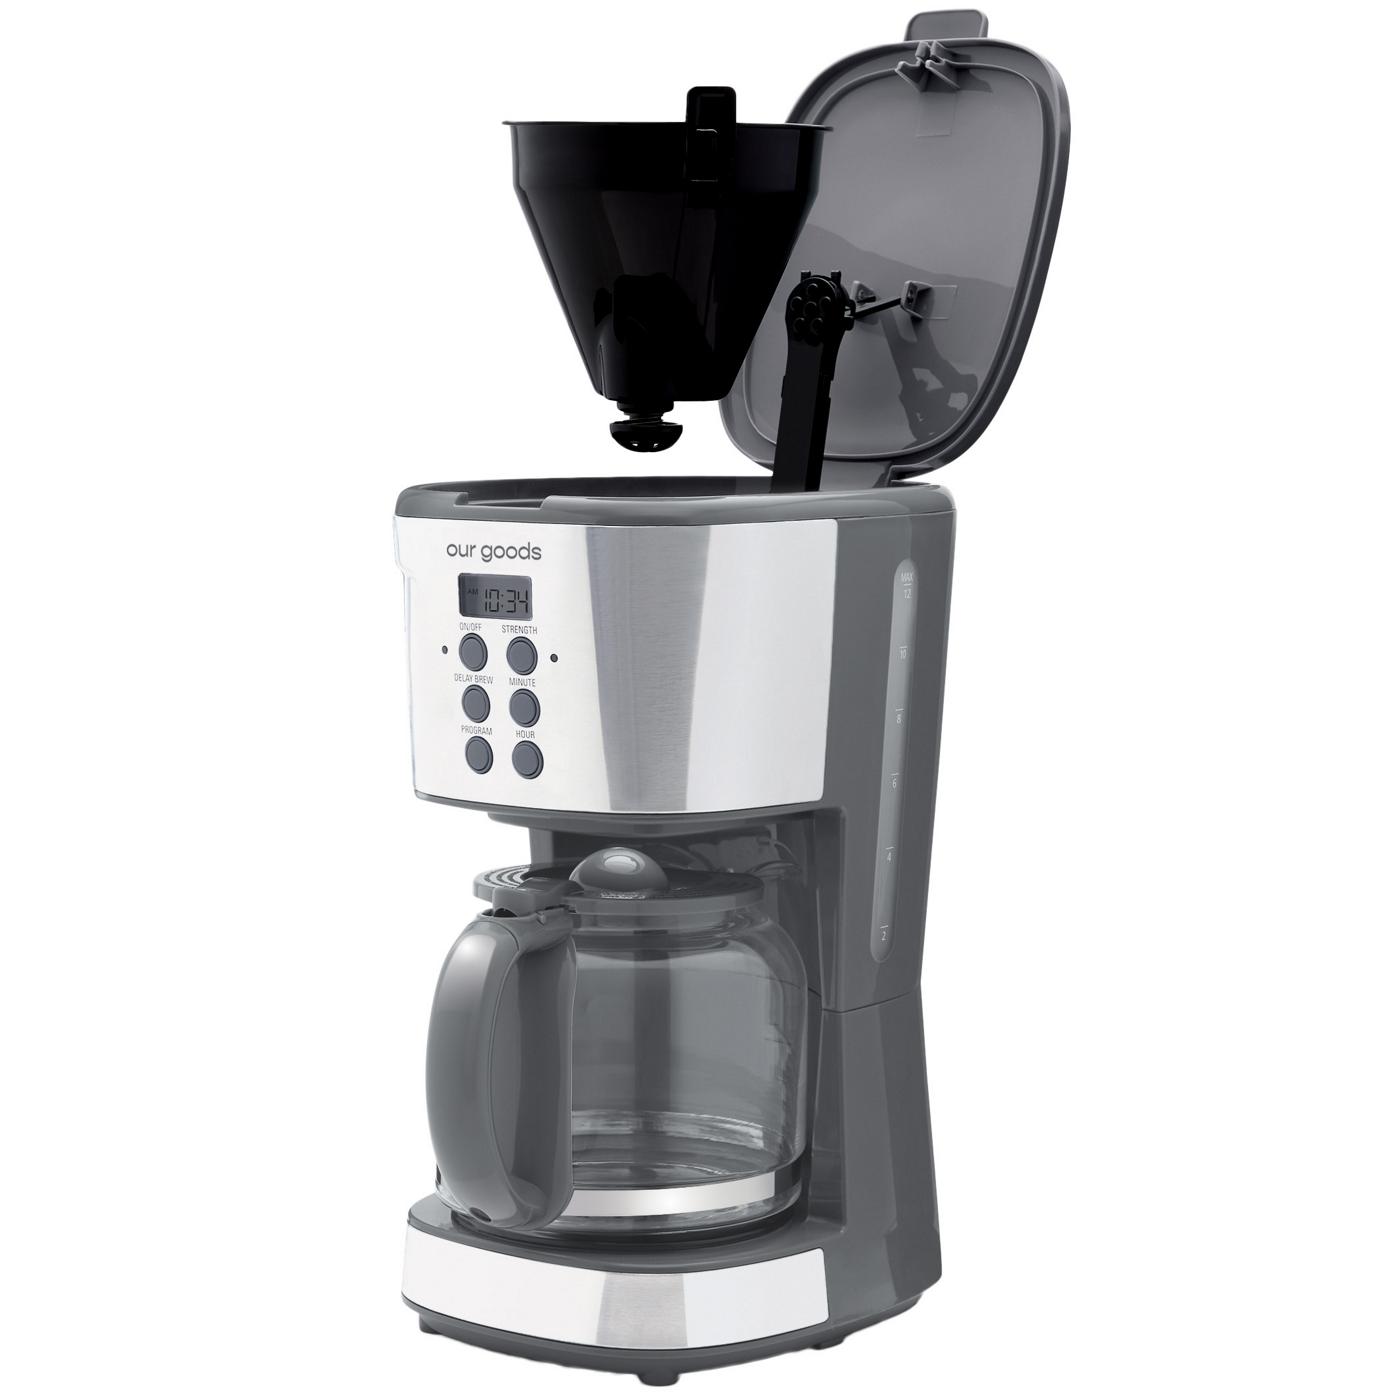 our goods Programmable Coffee Maker - Pebble Gray; image 5 of 5